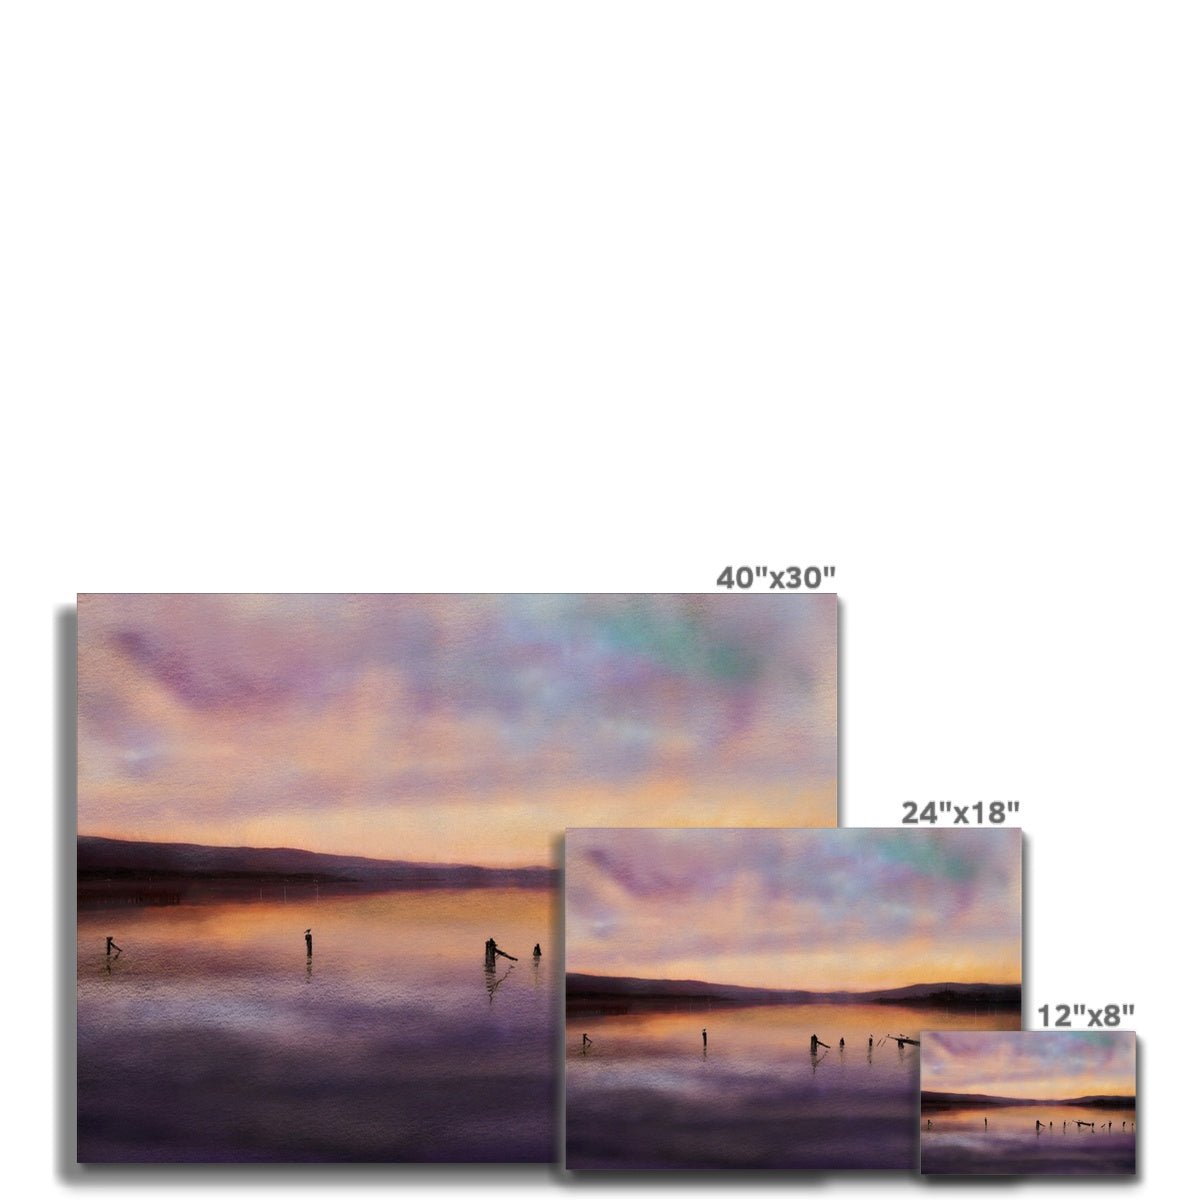 Admiralty Jetty Dusk Painting | Canvas From Scotland-Contemporary Stretched Canvas Prints-River Clyde Art Gallery-Paintings, Prints, Homeware, Art Gifts From Scotland By Scottish Artist Kevin Hunter